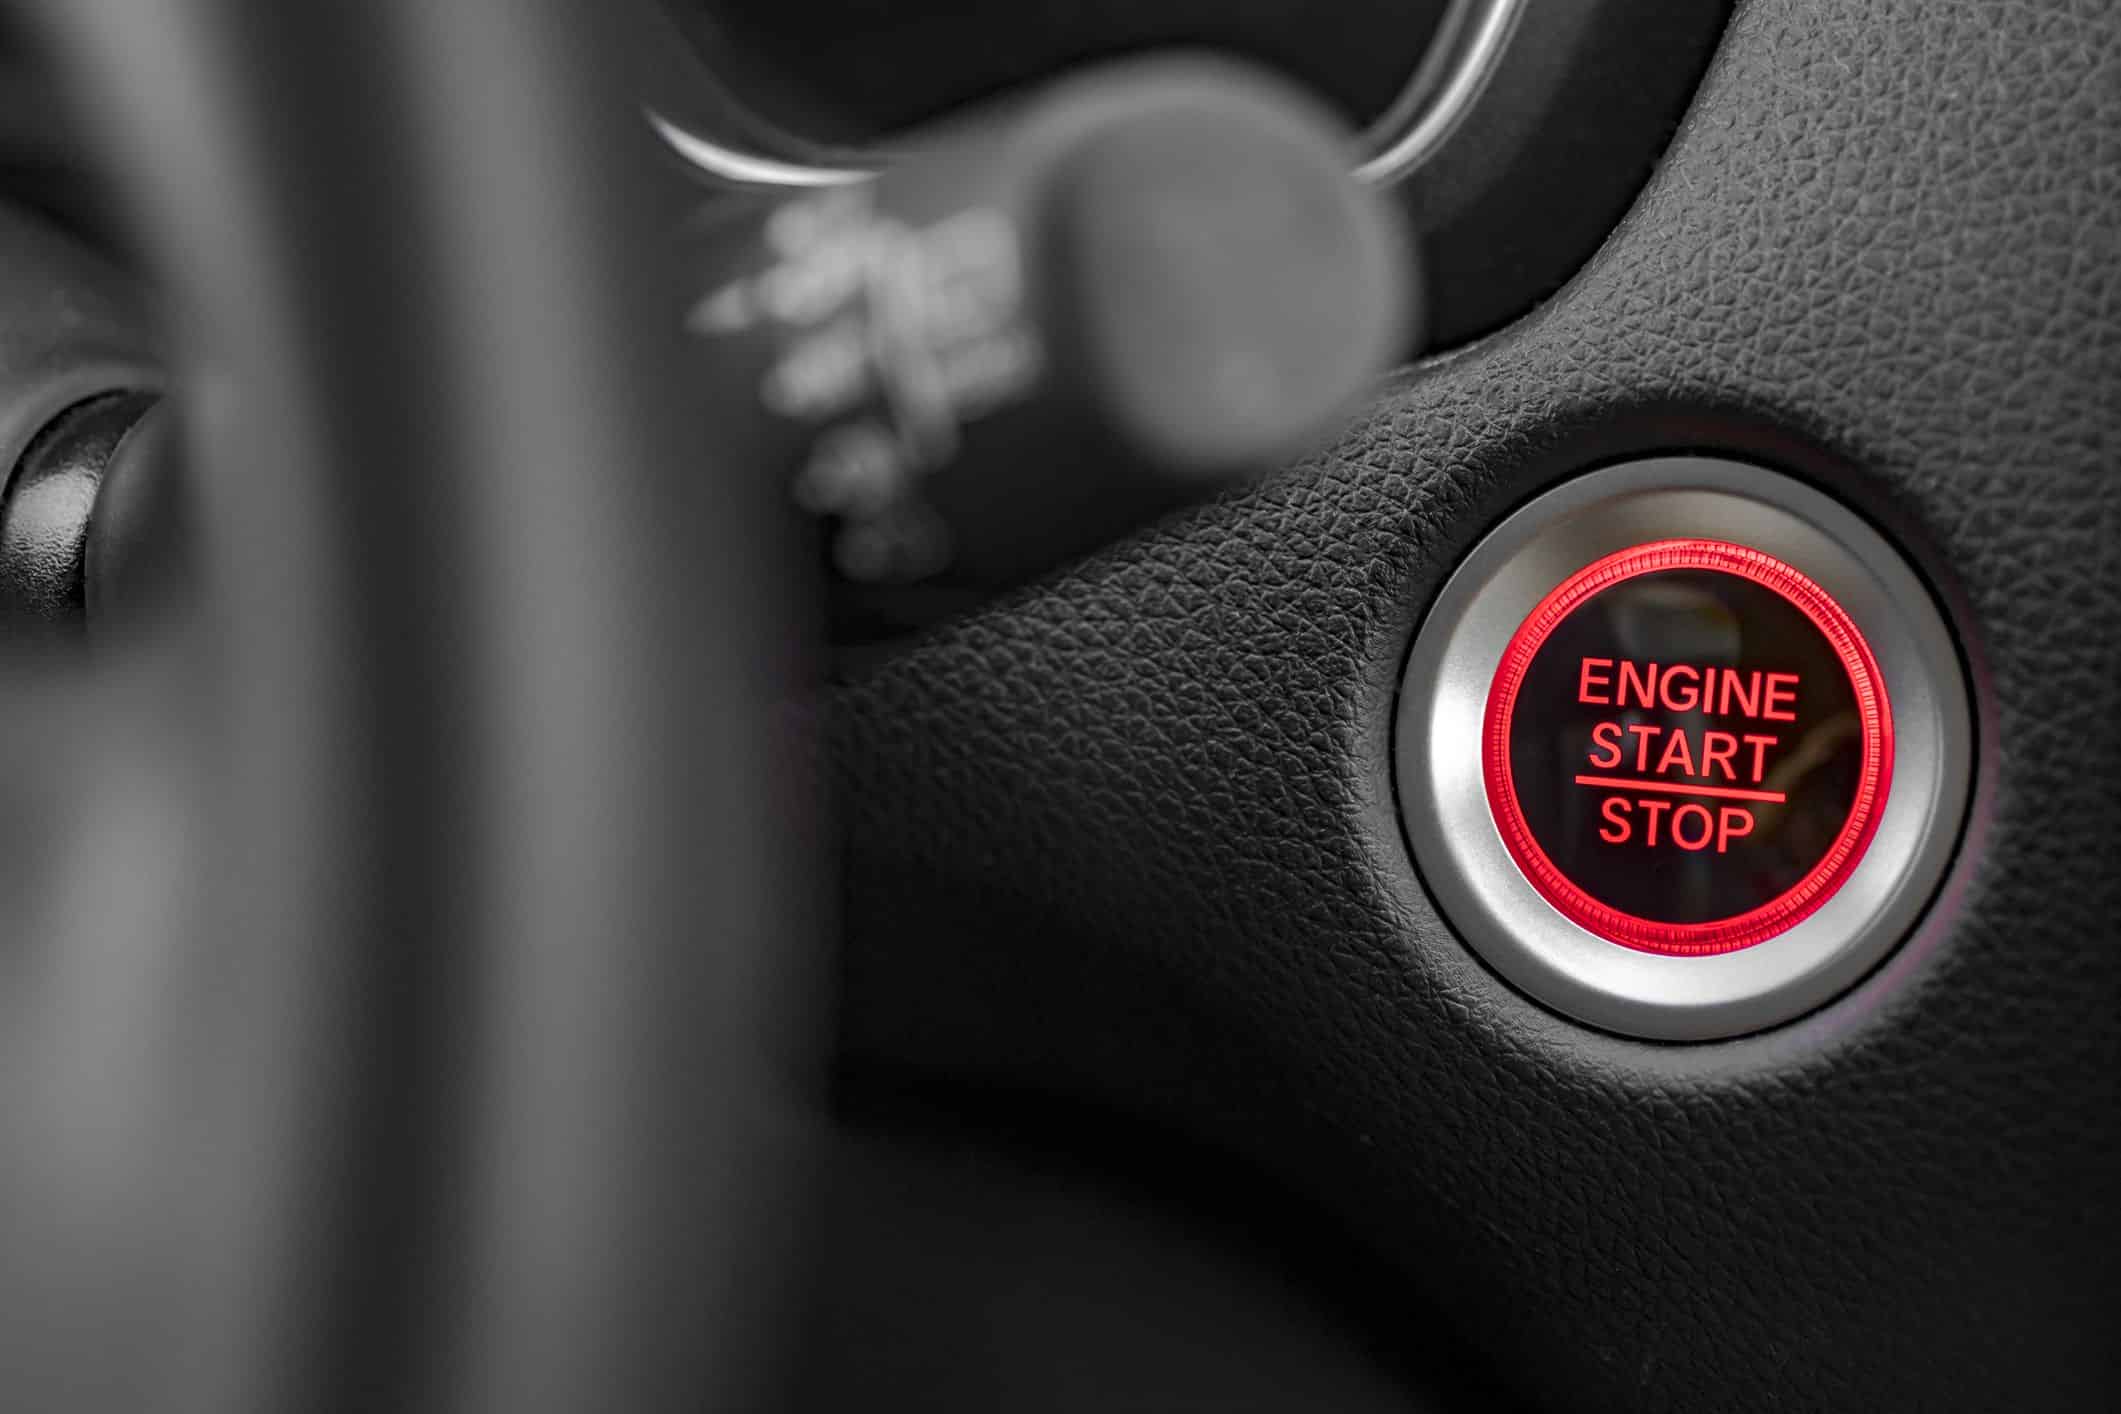 Upgrade Your Older Car with push-button start ignitions